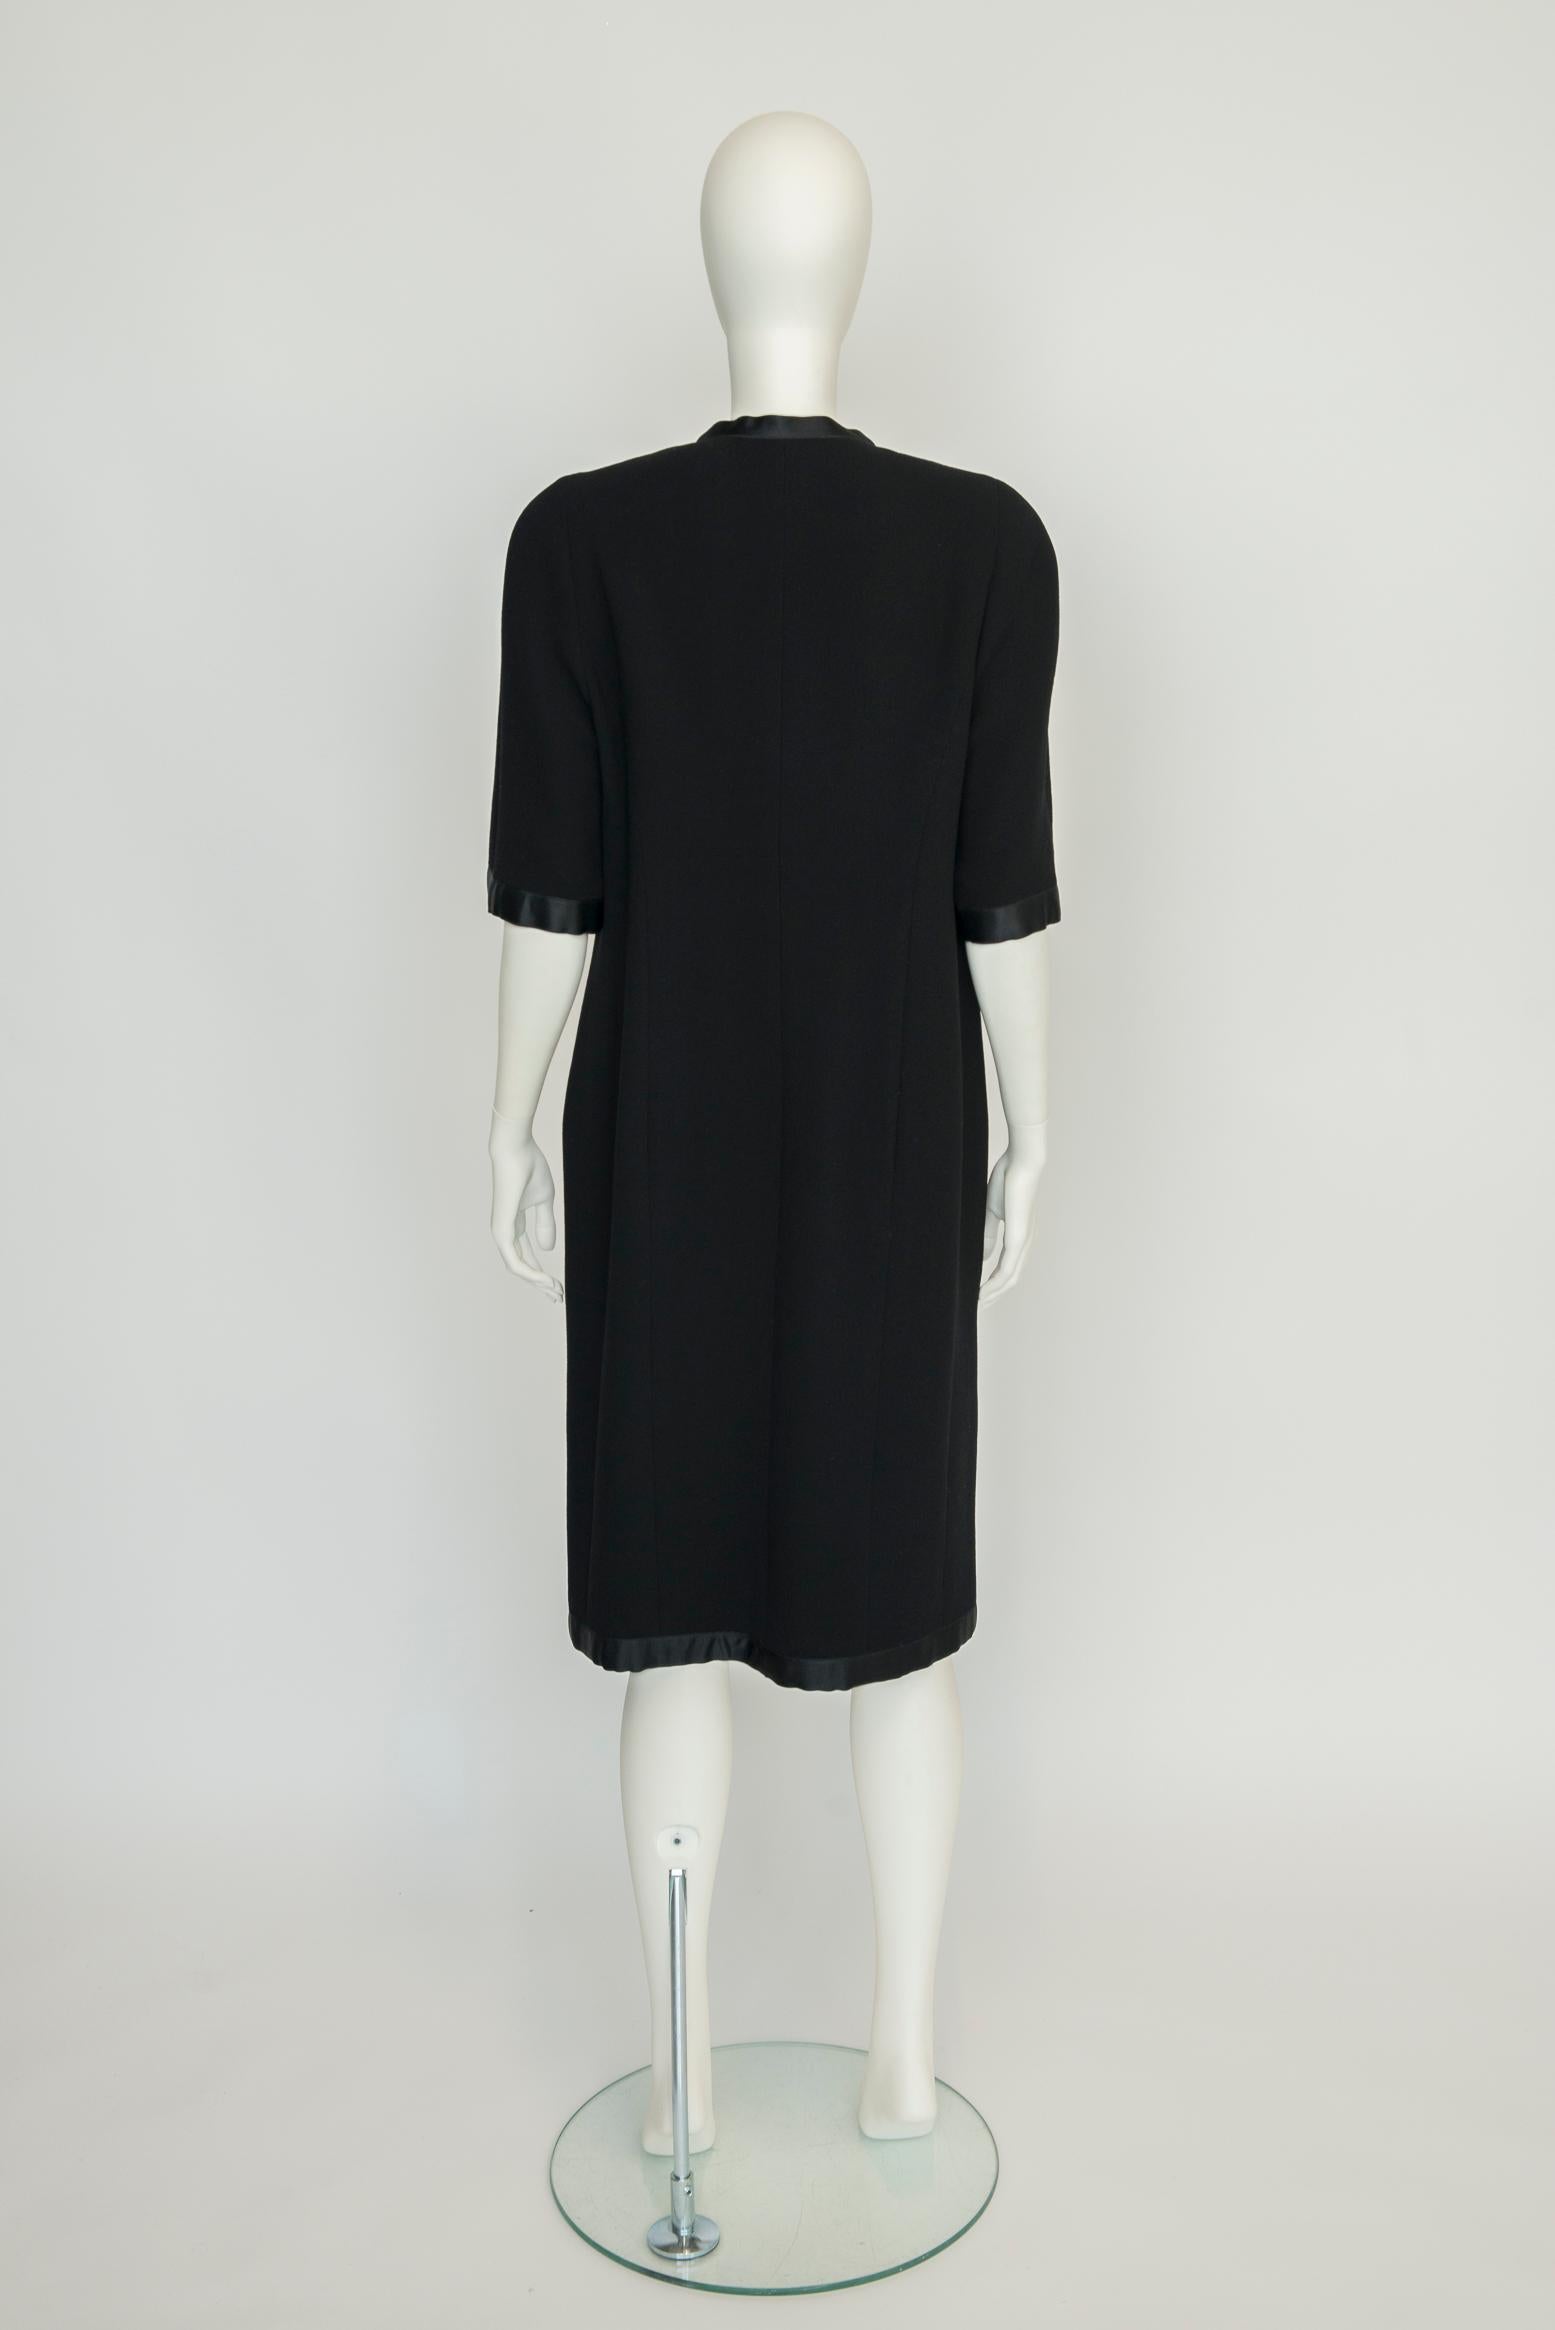 Chanel By Karl Lagerfeld Button-Embellished Little Black Dress, FW 1990-1991 For Sale 3